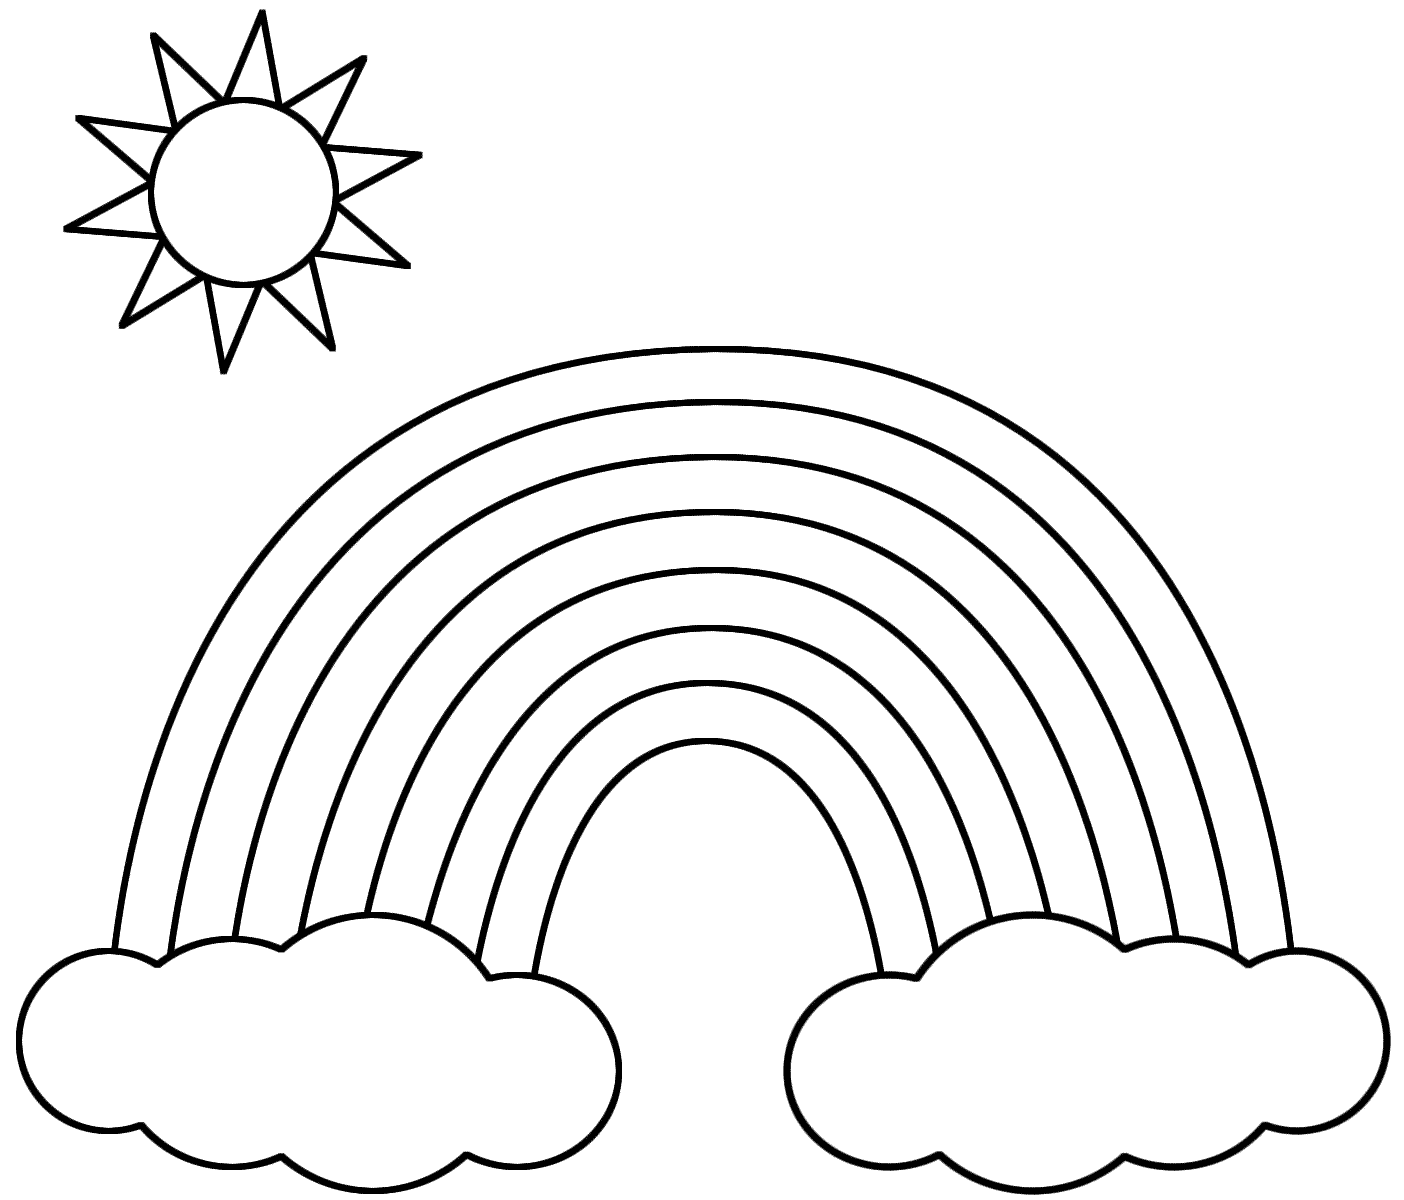 Below Is The Coloring Page To Print  Just Click On The Print Button